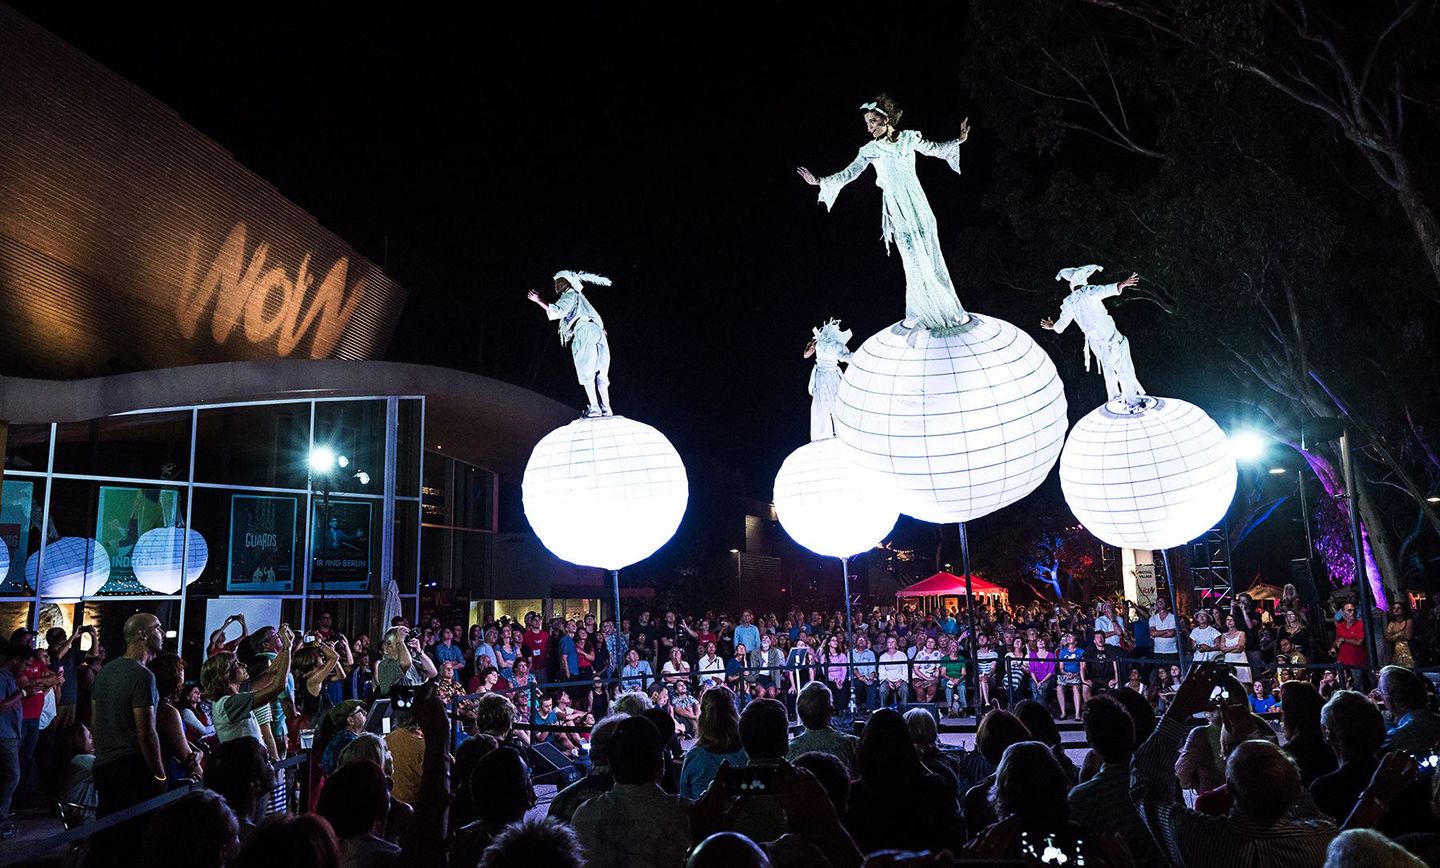 La Jolla Playhouse's Without Walls (WOW) Festival production of The Spheres